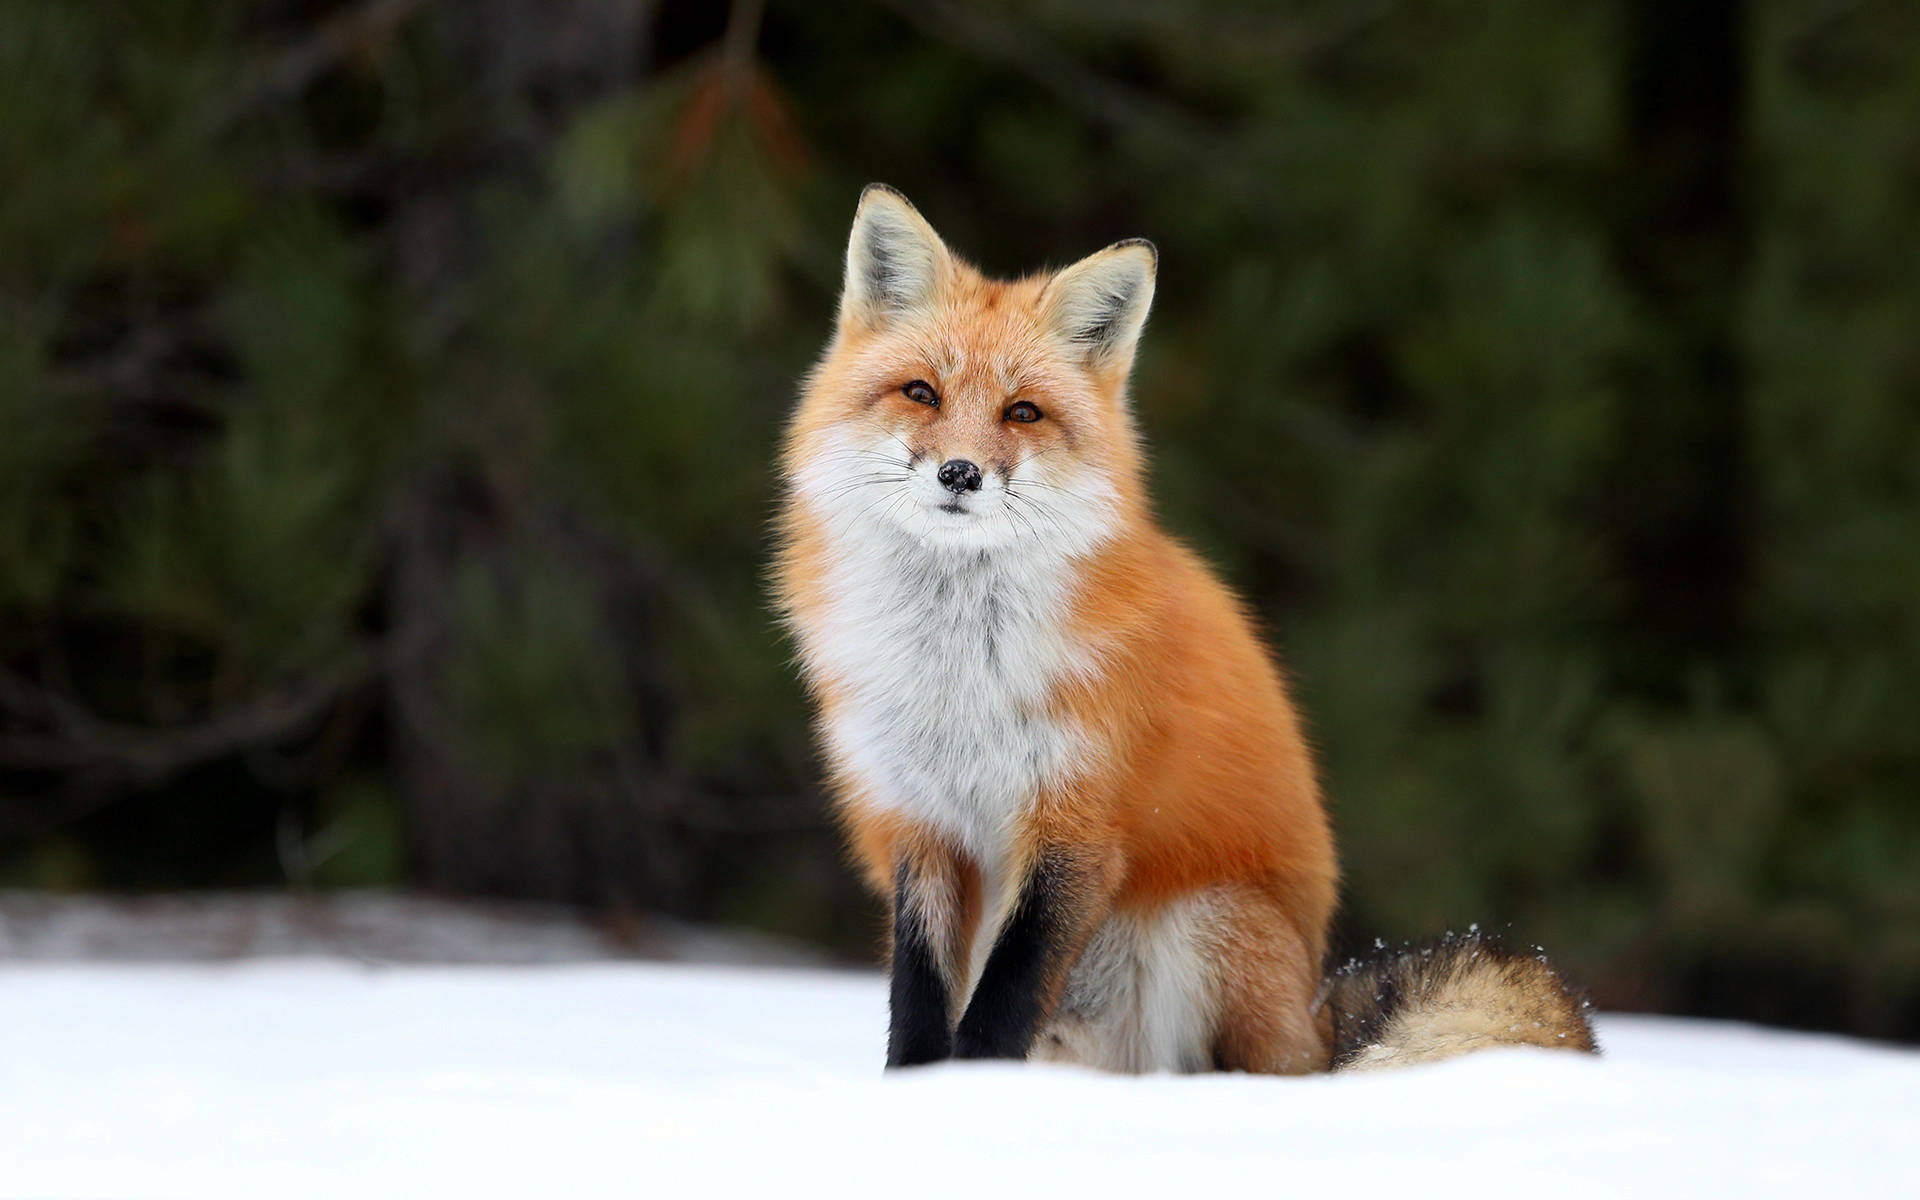 A furry red fox gazing into the distance Wallpaper